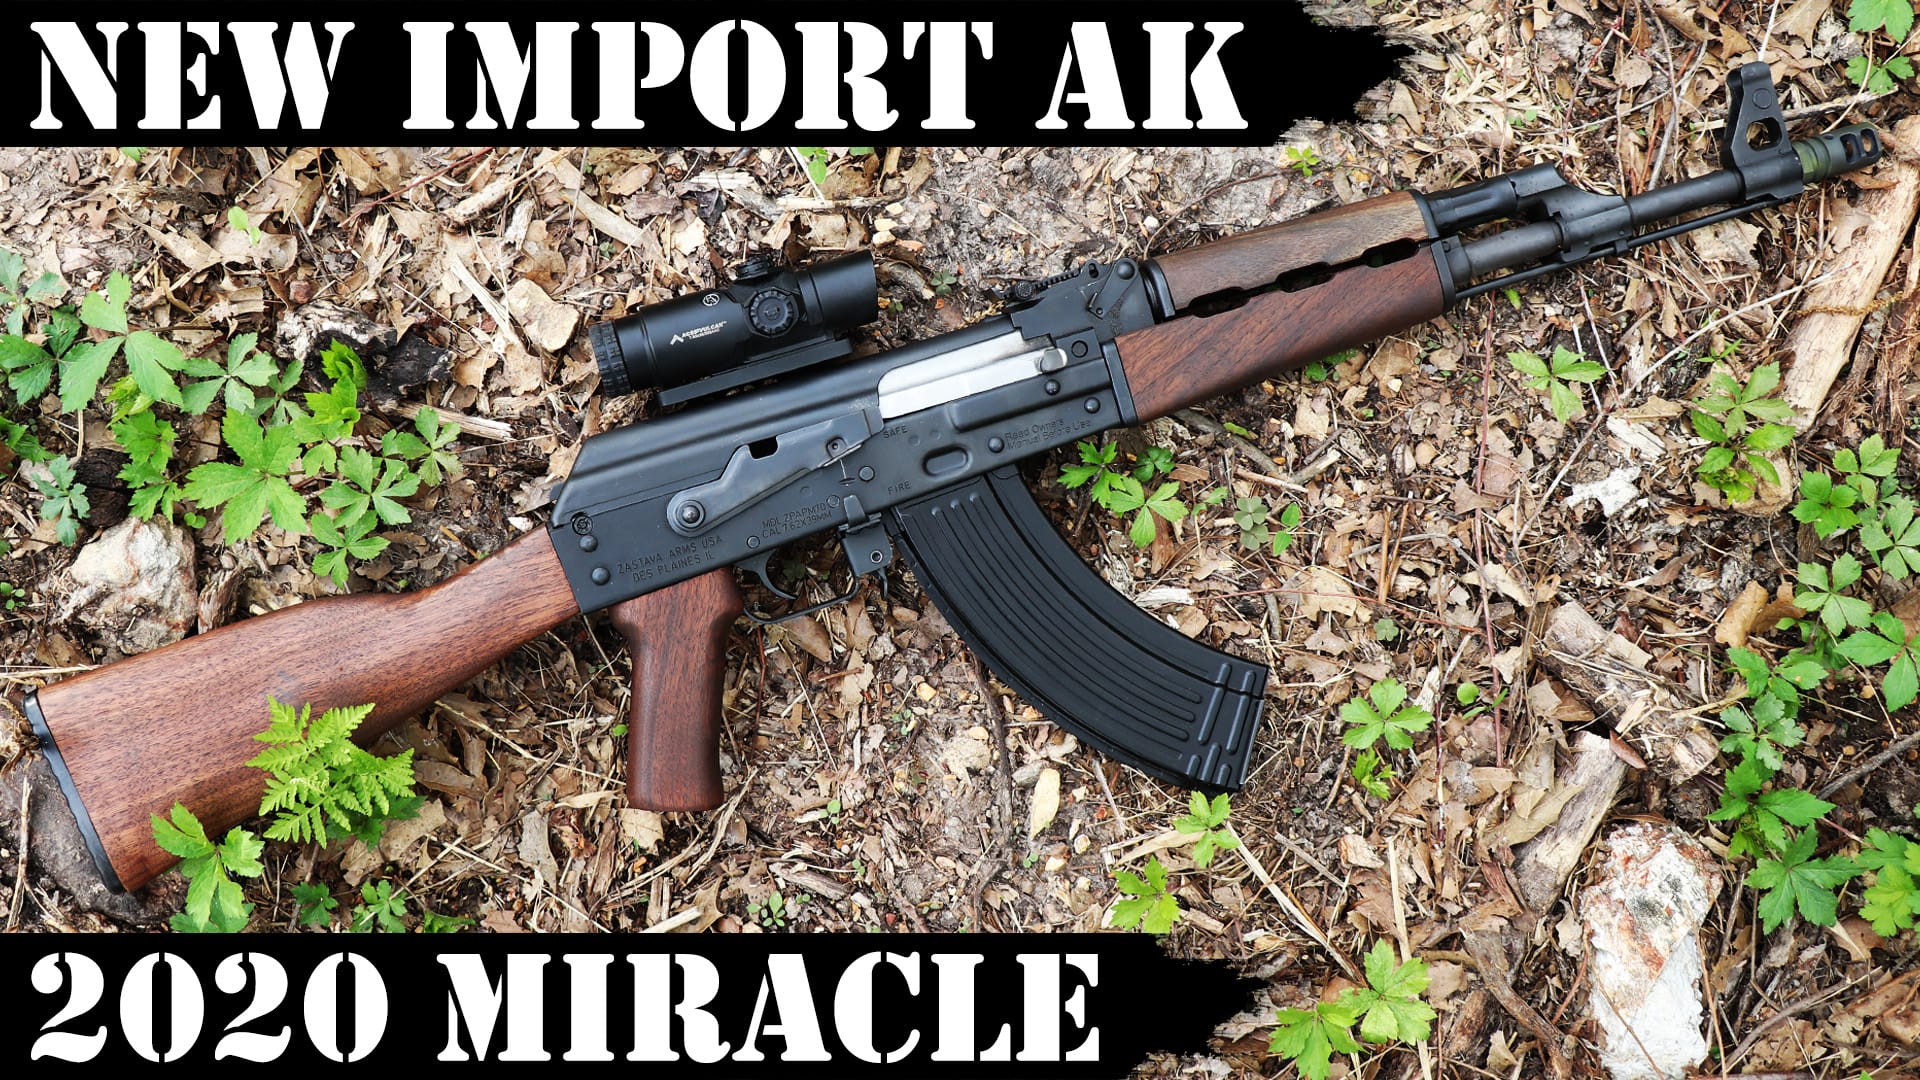 New Import AK – 2020 Miracle!